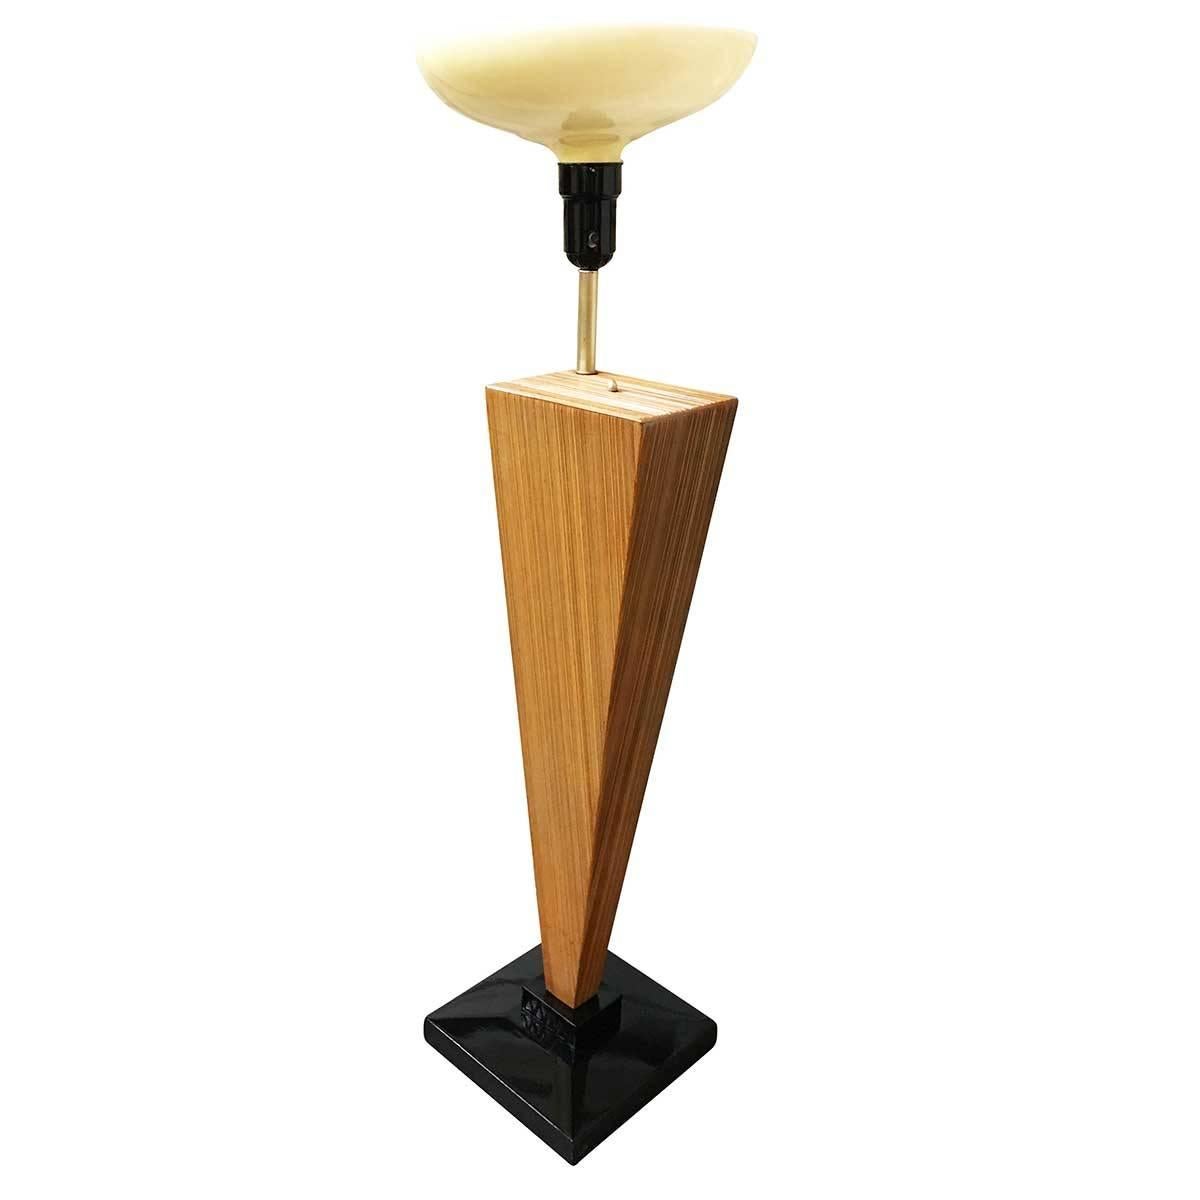 This angular combed wood floor lamp was designed in the style of Paul Frankl, famous for his iconic combed wood furniture pieces designed in the Mid-Century. The lamp has a gloss black lacquer base and comes with a torchiere style glass shade. The